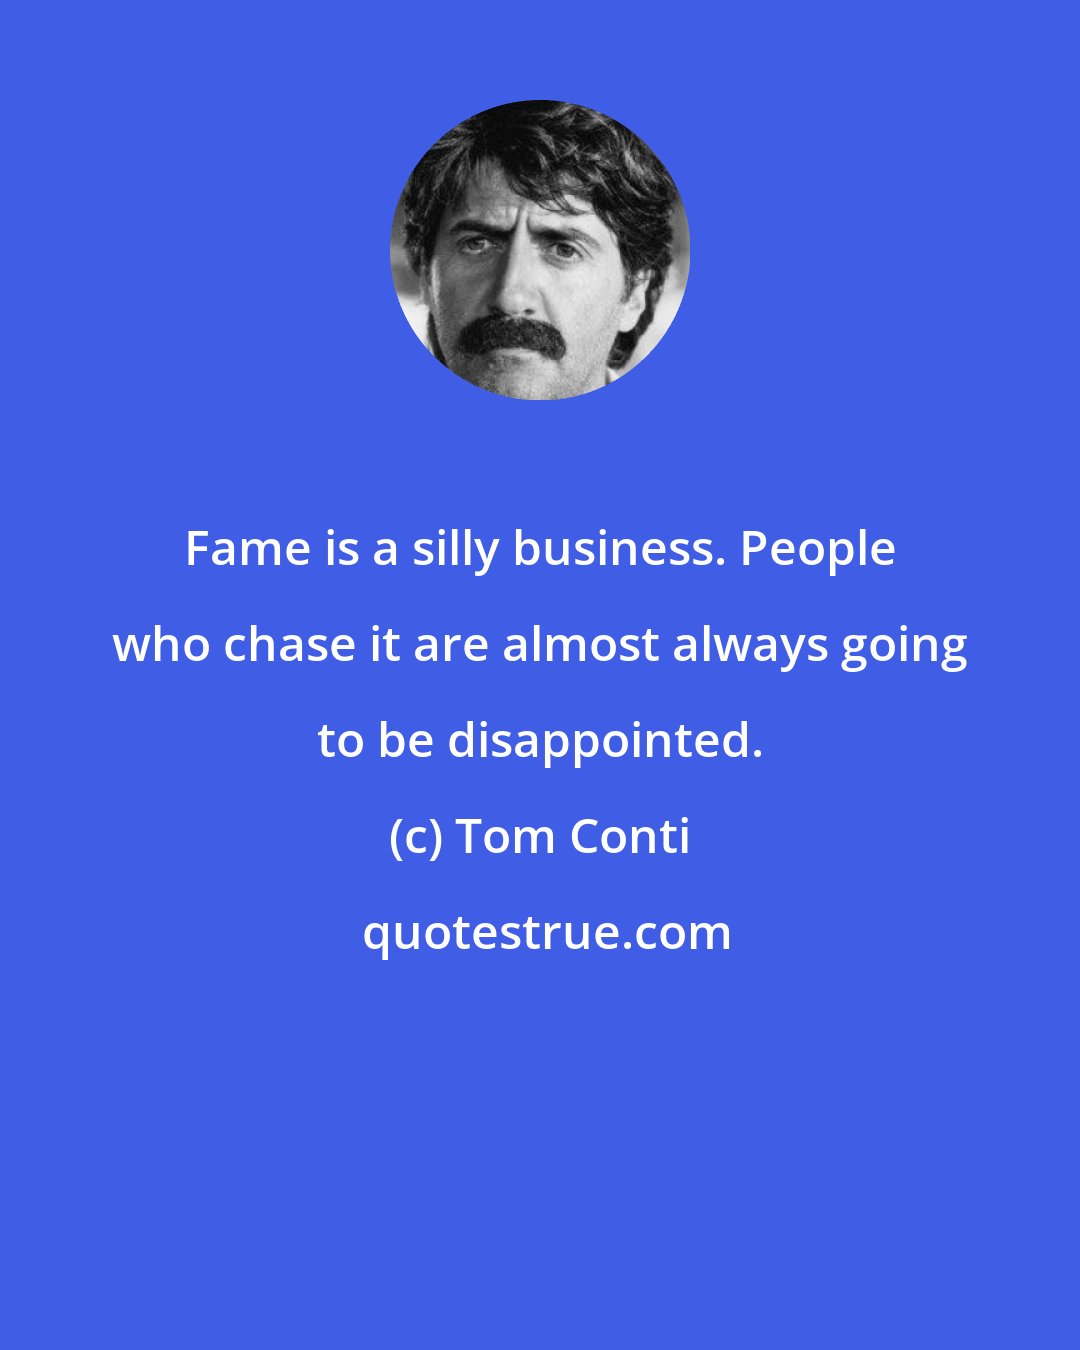 Tom Conti: Fame is a silly business. People who chase it are almost always going to be disappointed.